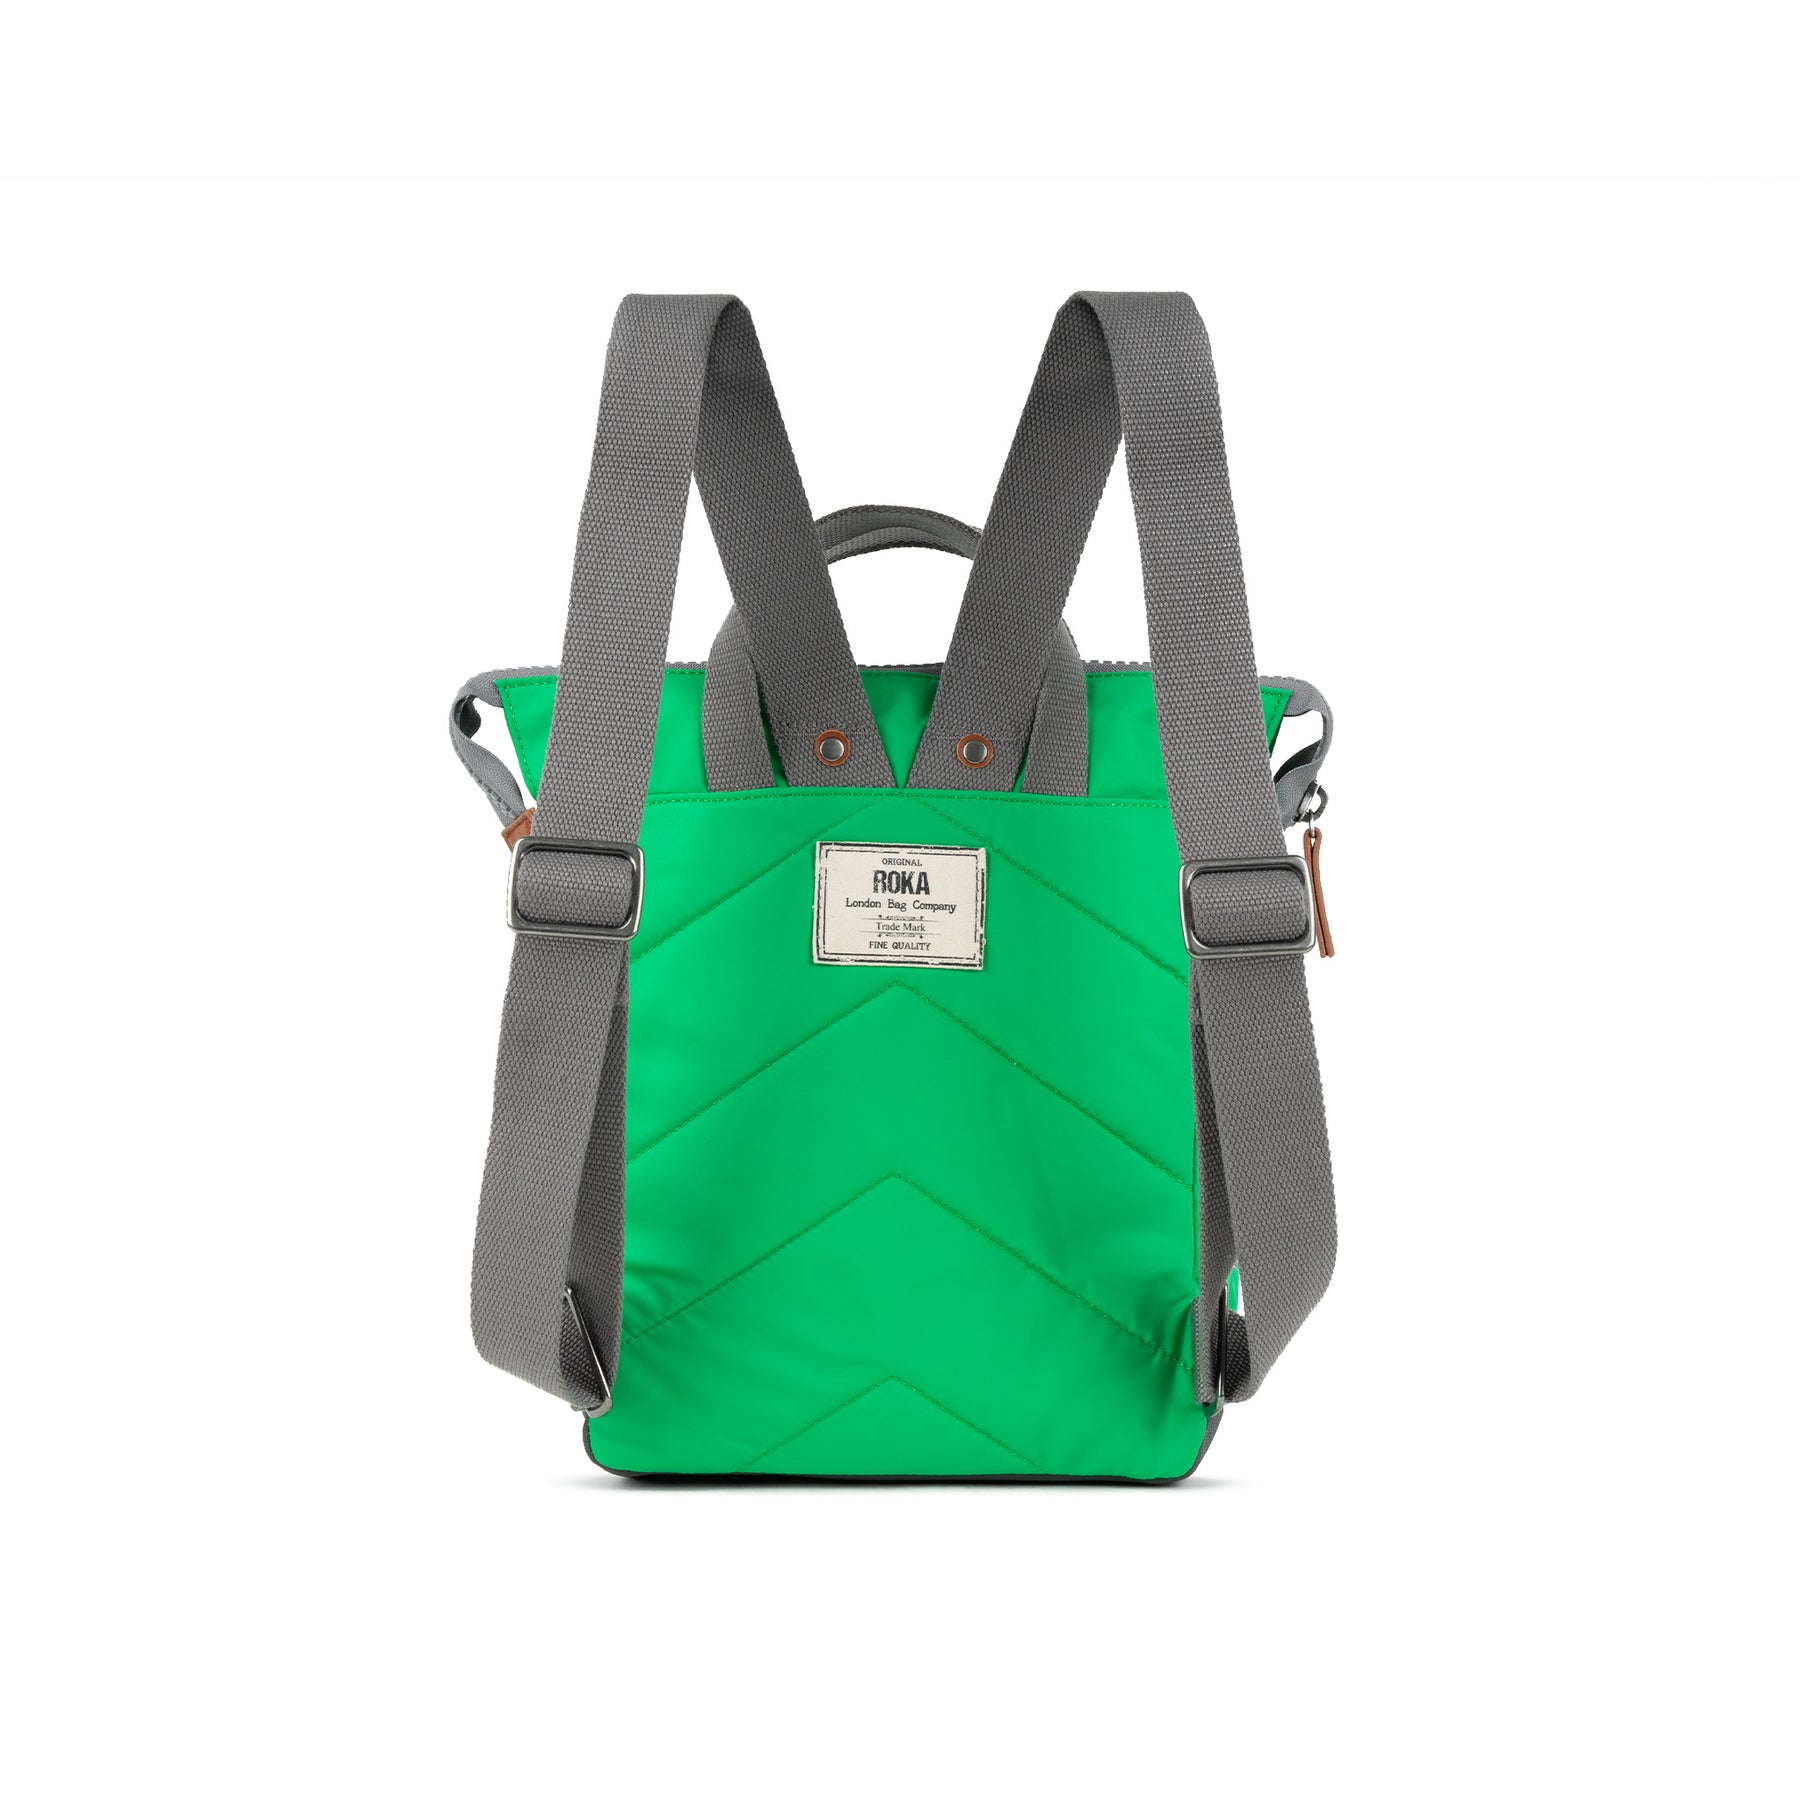 Buy Green apple Backpack Bag Blue at Amazon.in